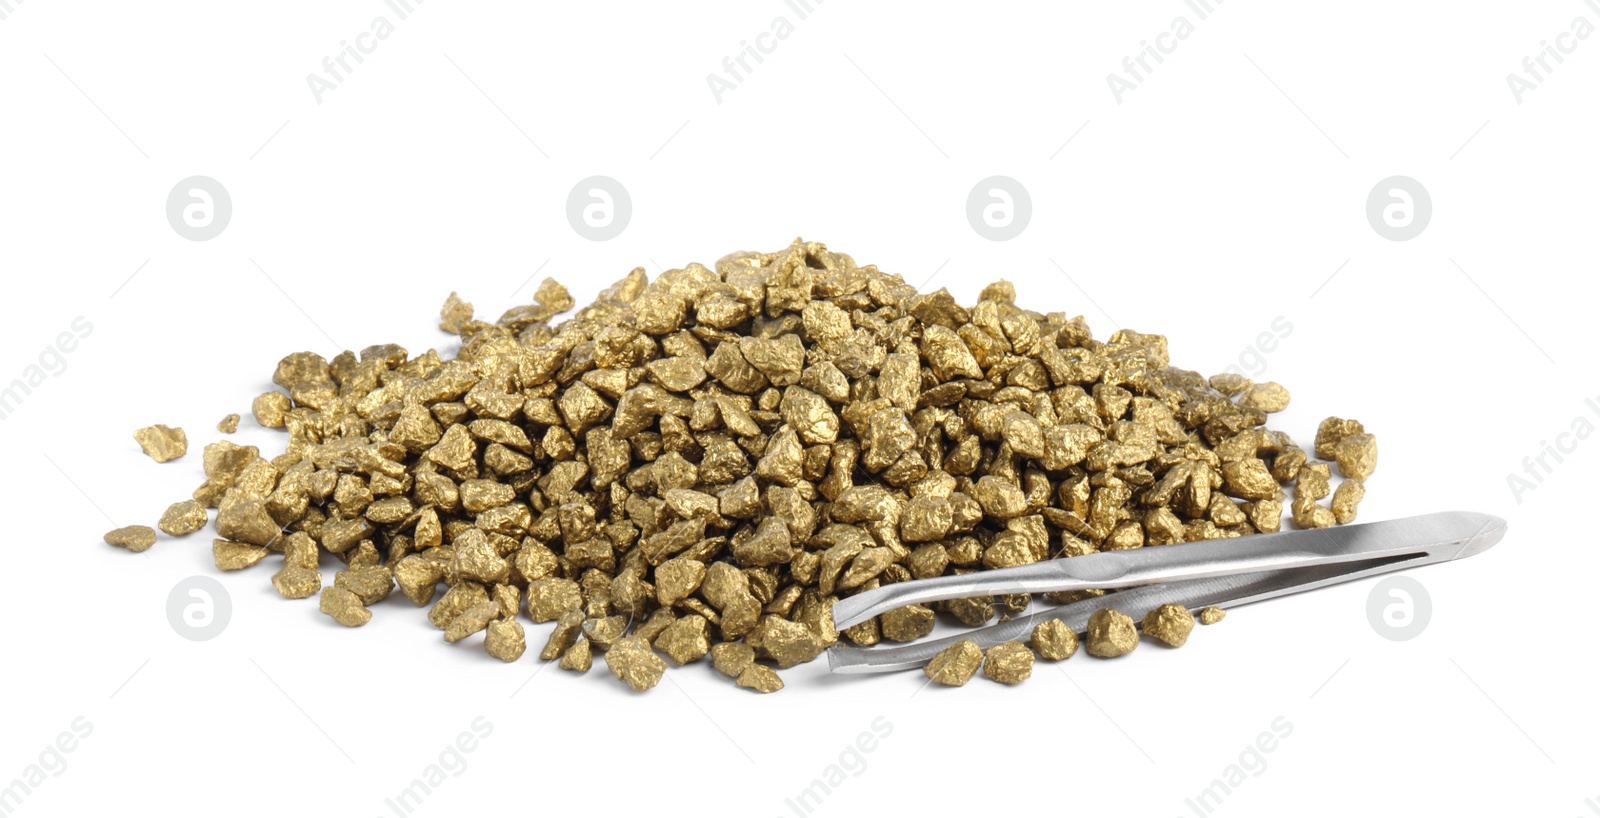 Photo of Pile of gold nuggets and tweezers on white background